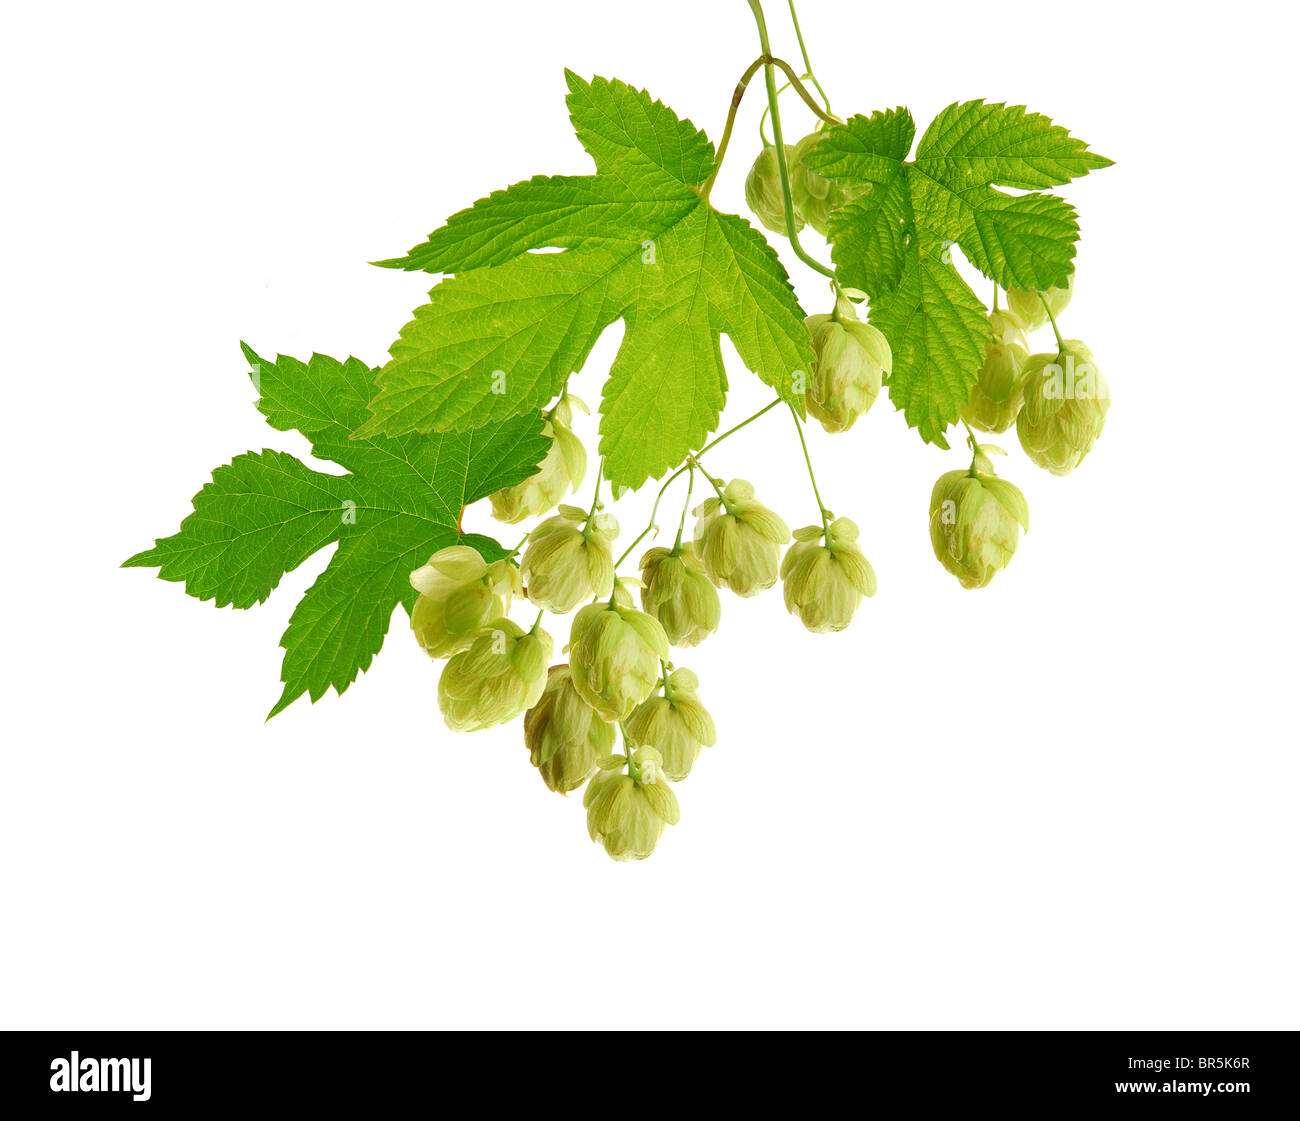 Hop plant with cones Stock Photo